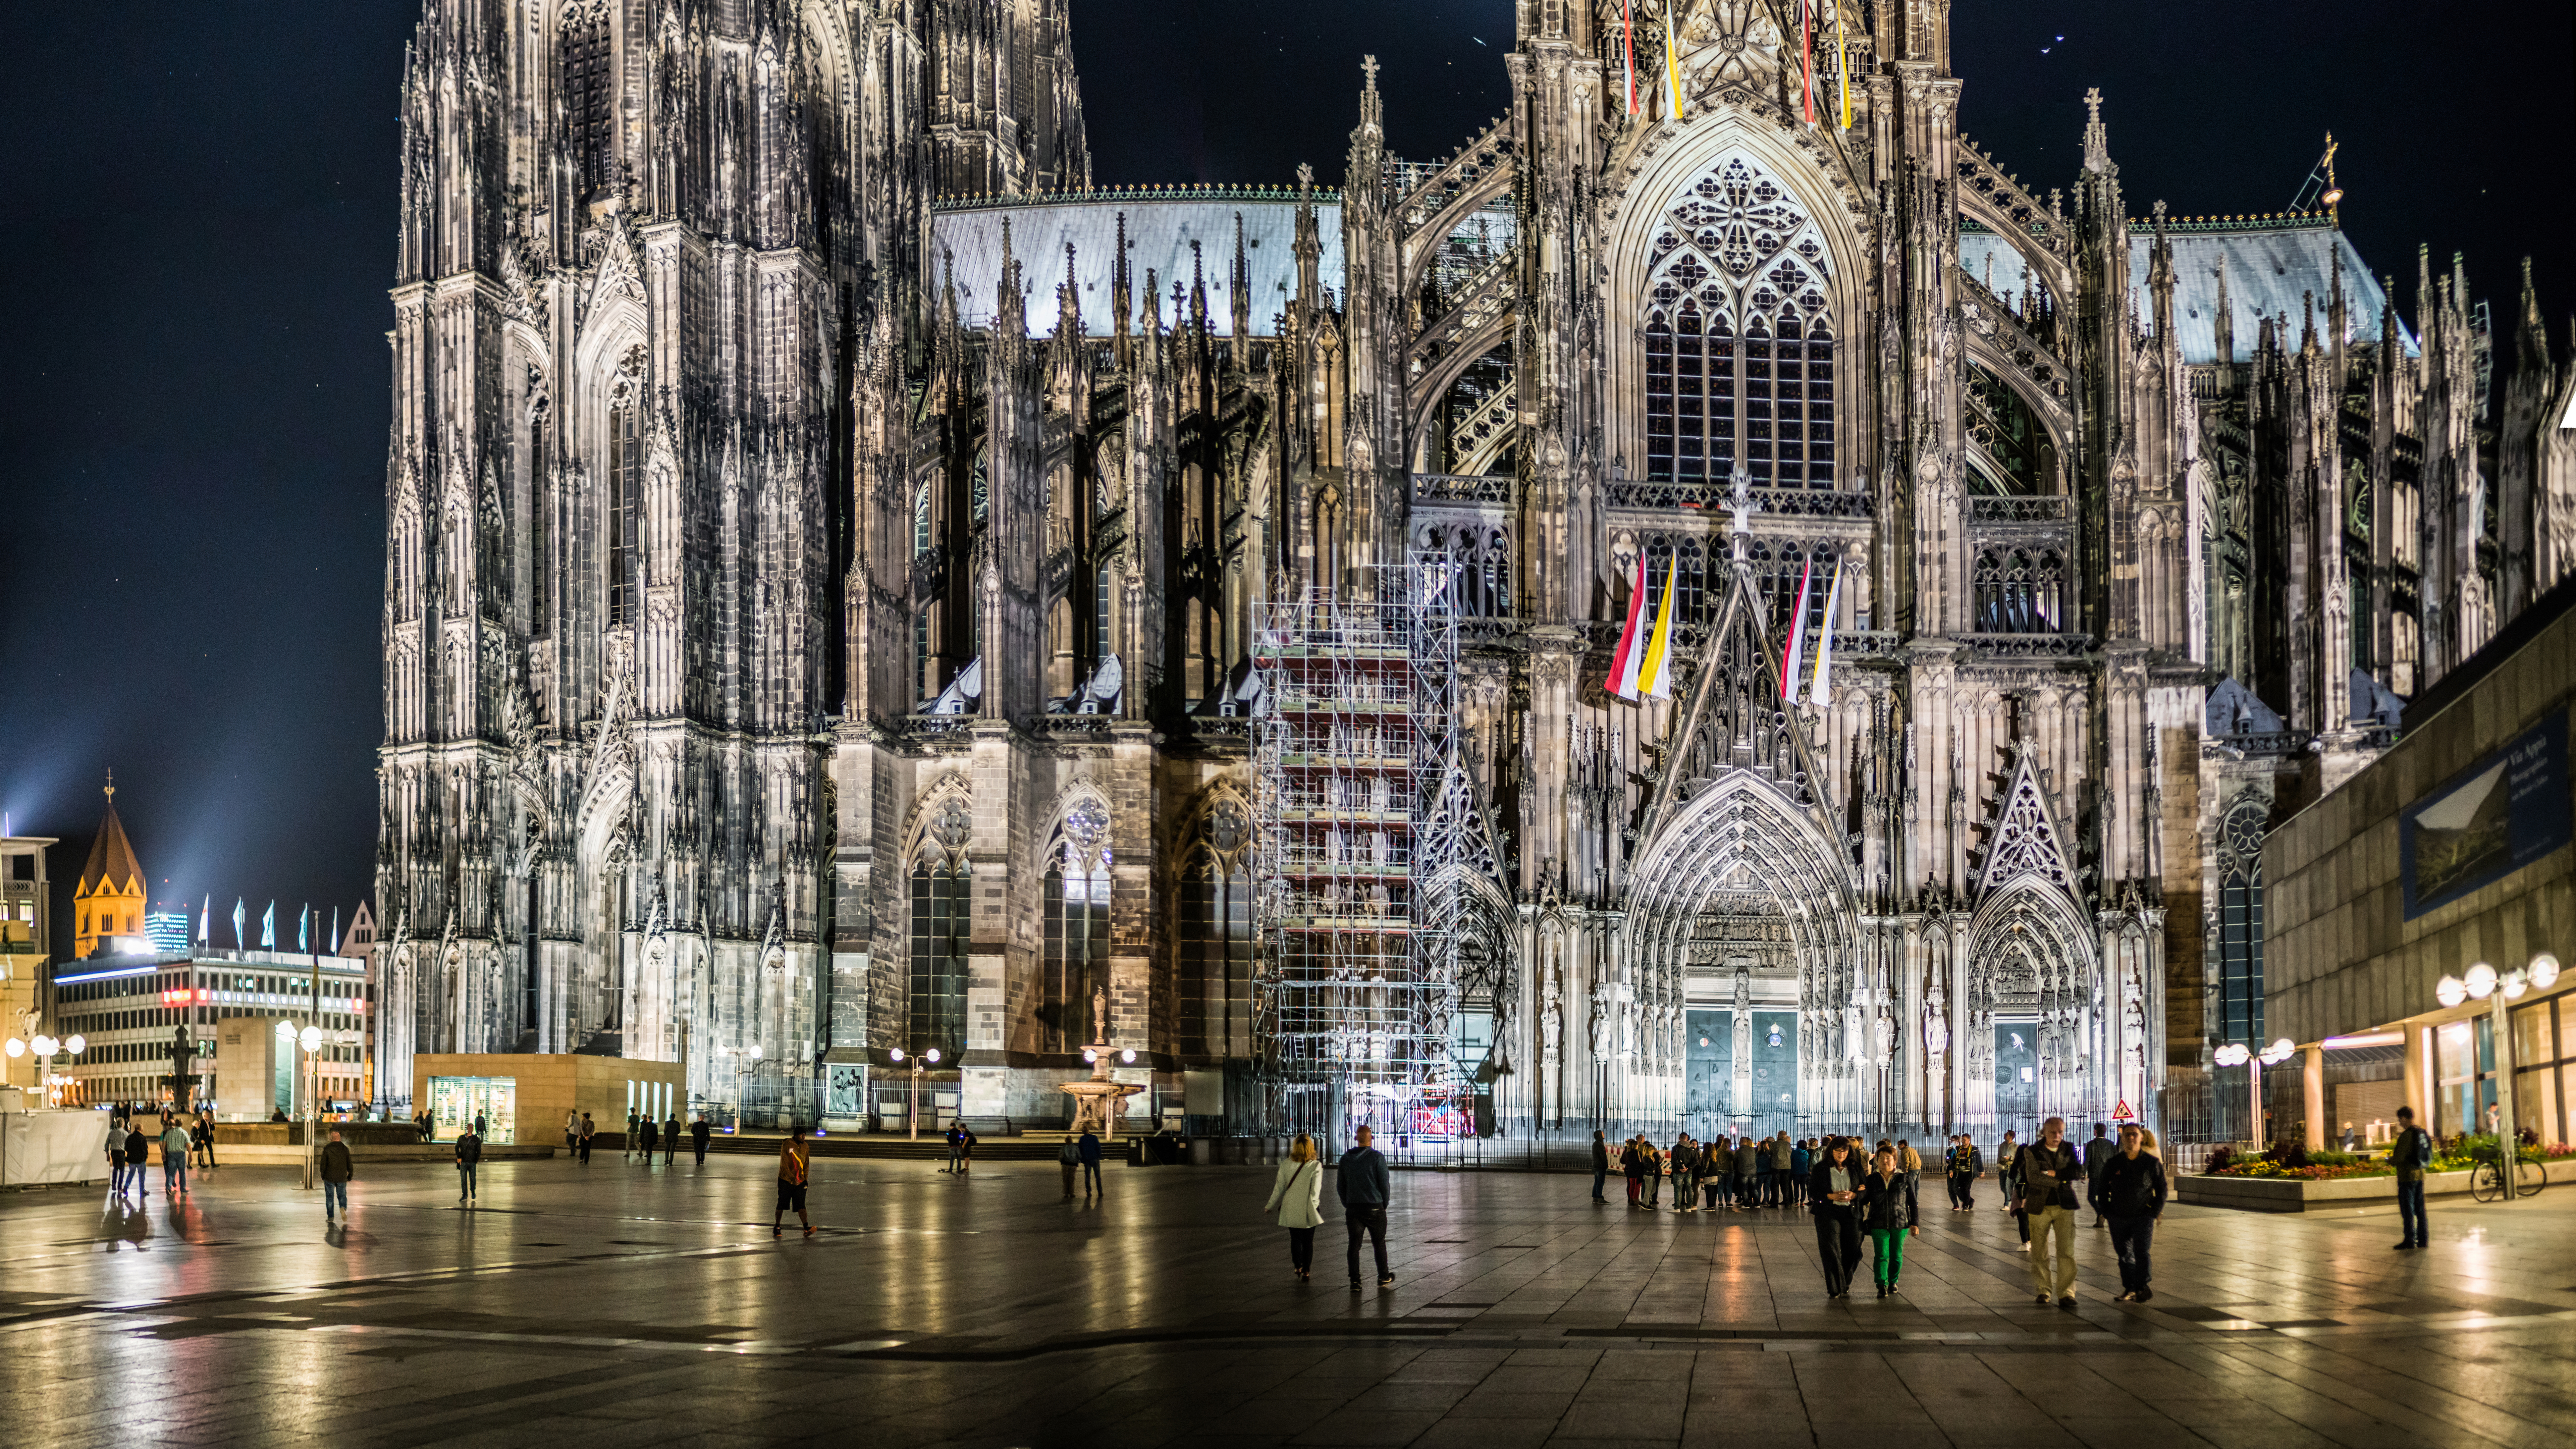 General 7680x4320 Trey Ratcliff Germany Cologne building architecture cathedral landmark Europe